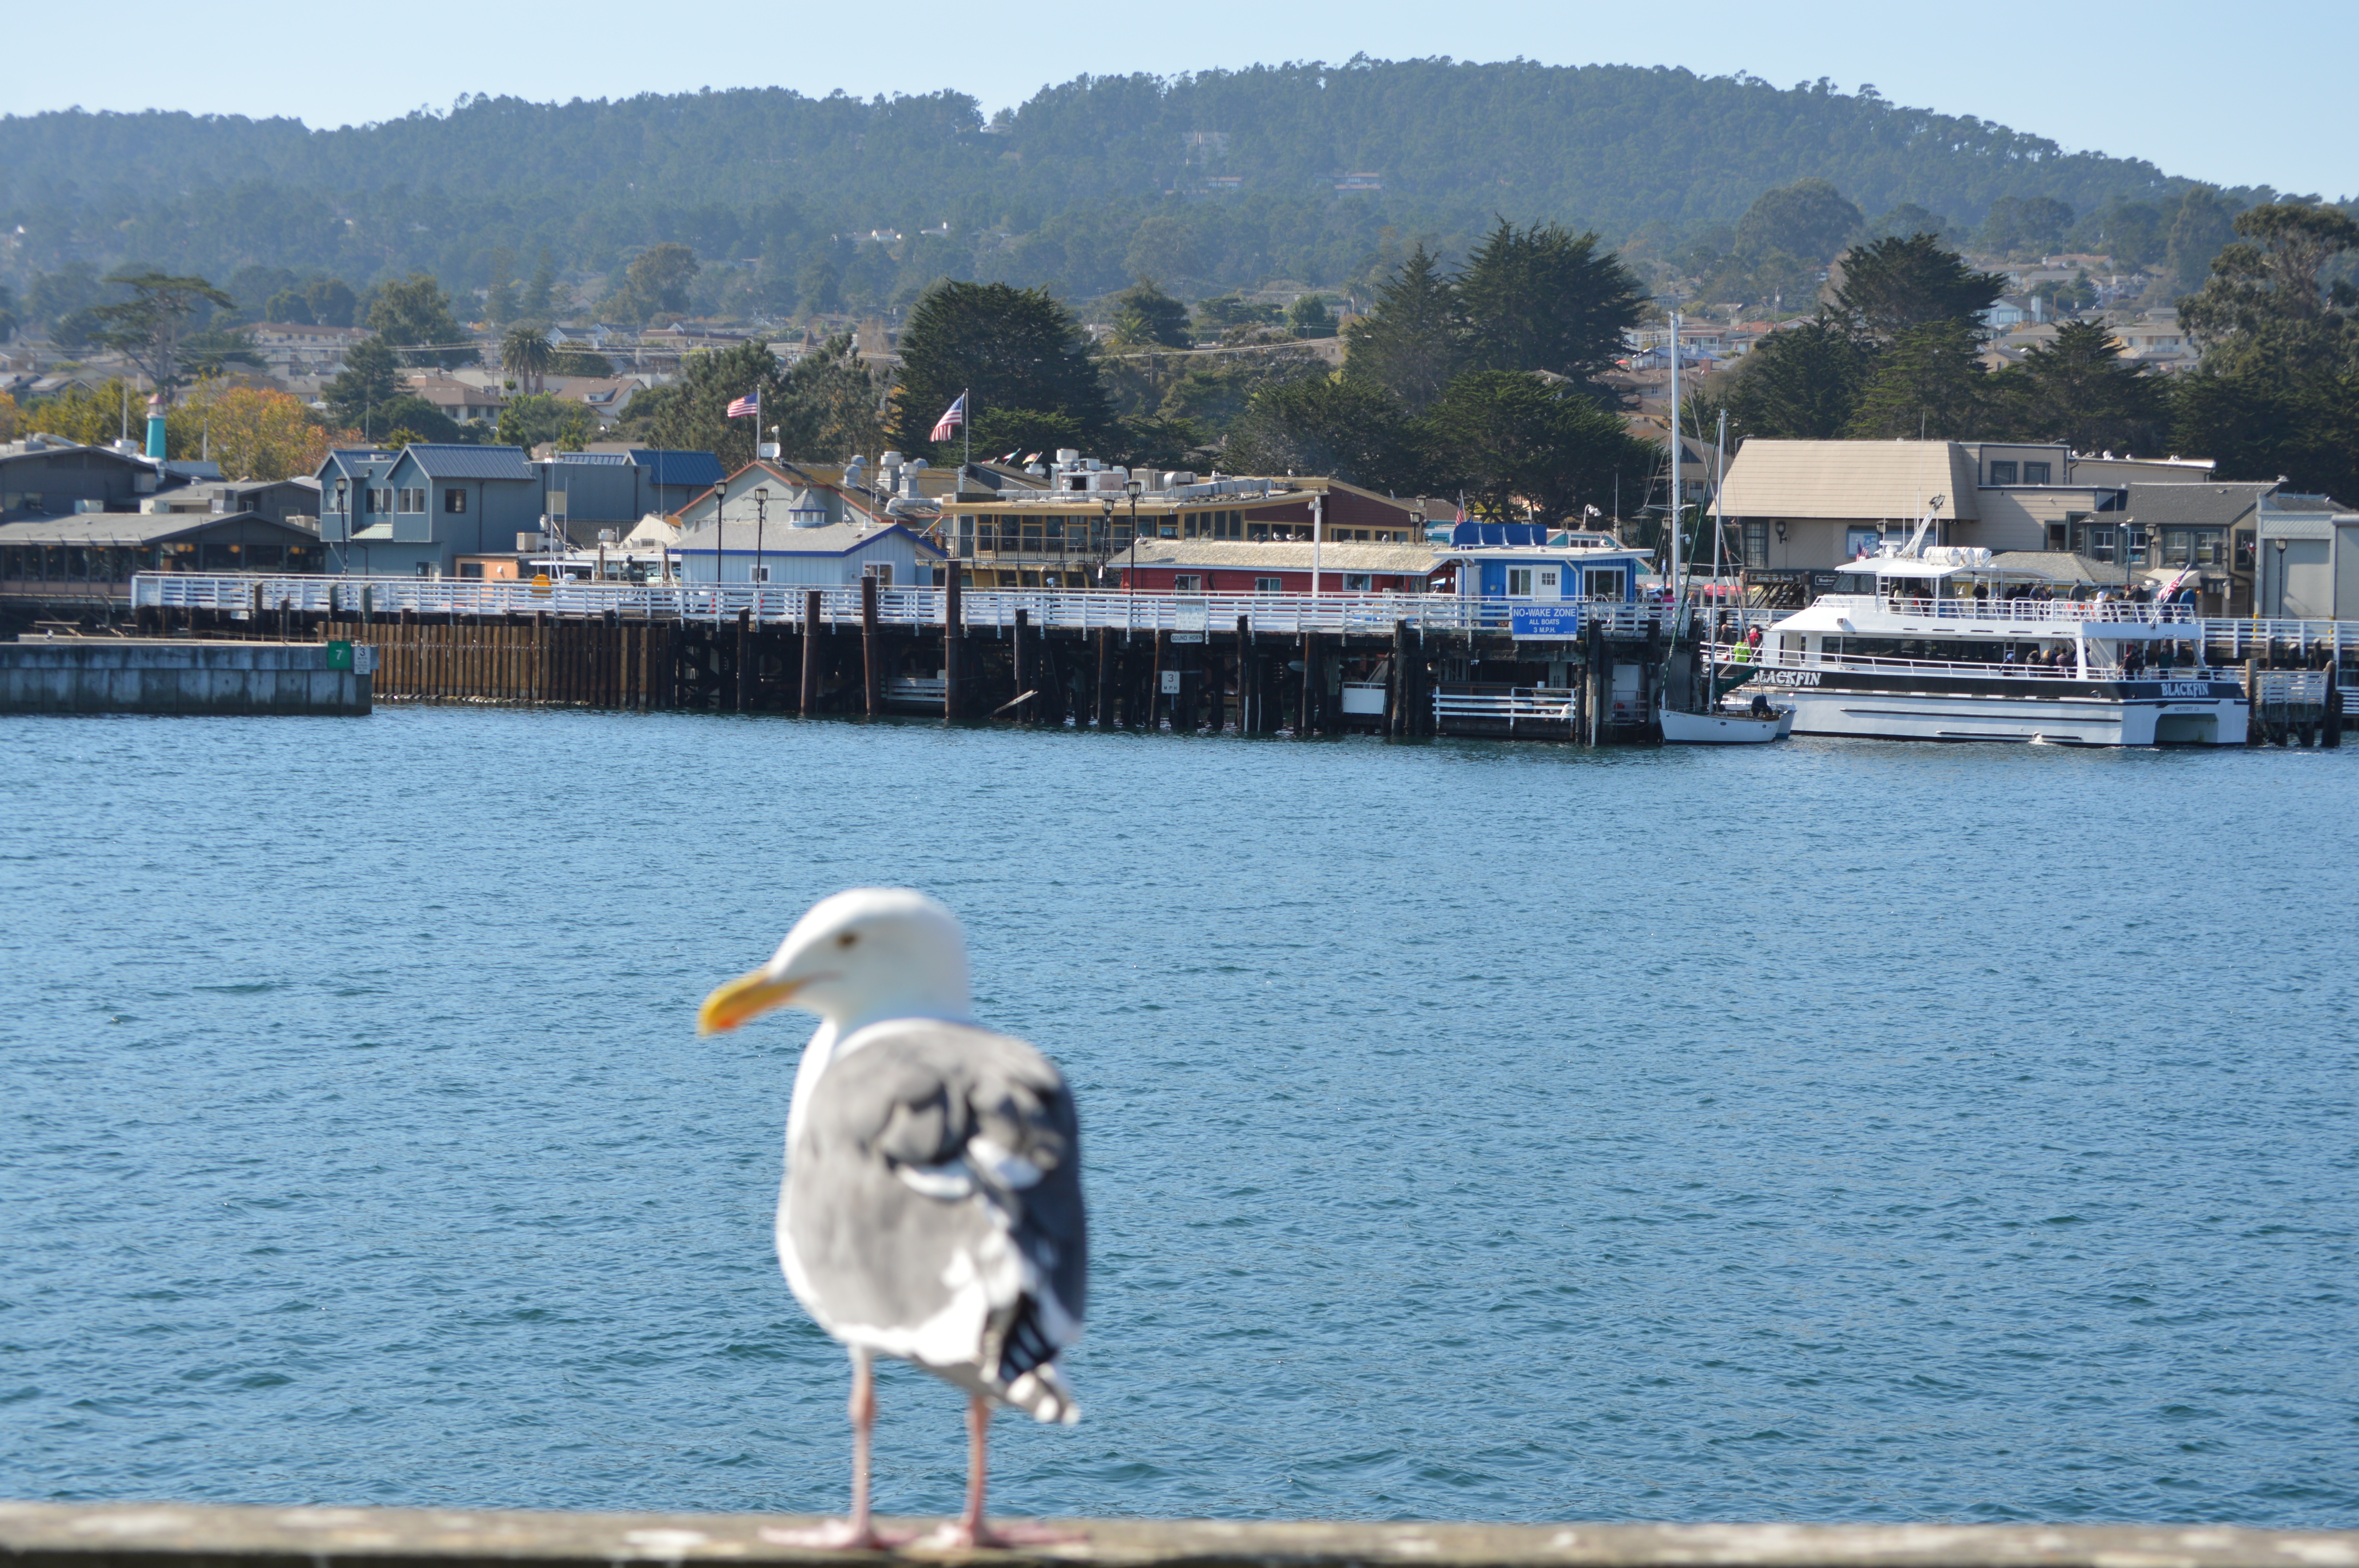 a seagull standing on a railing overlooking a body of water